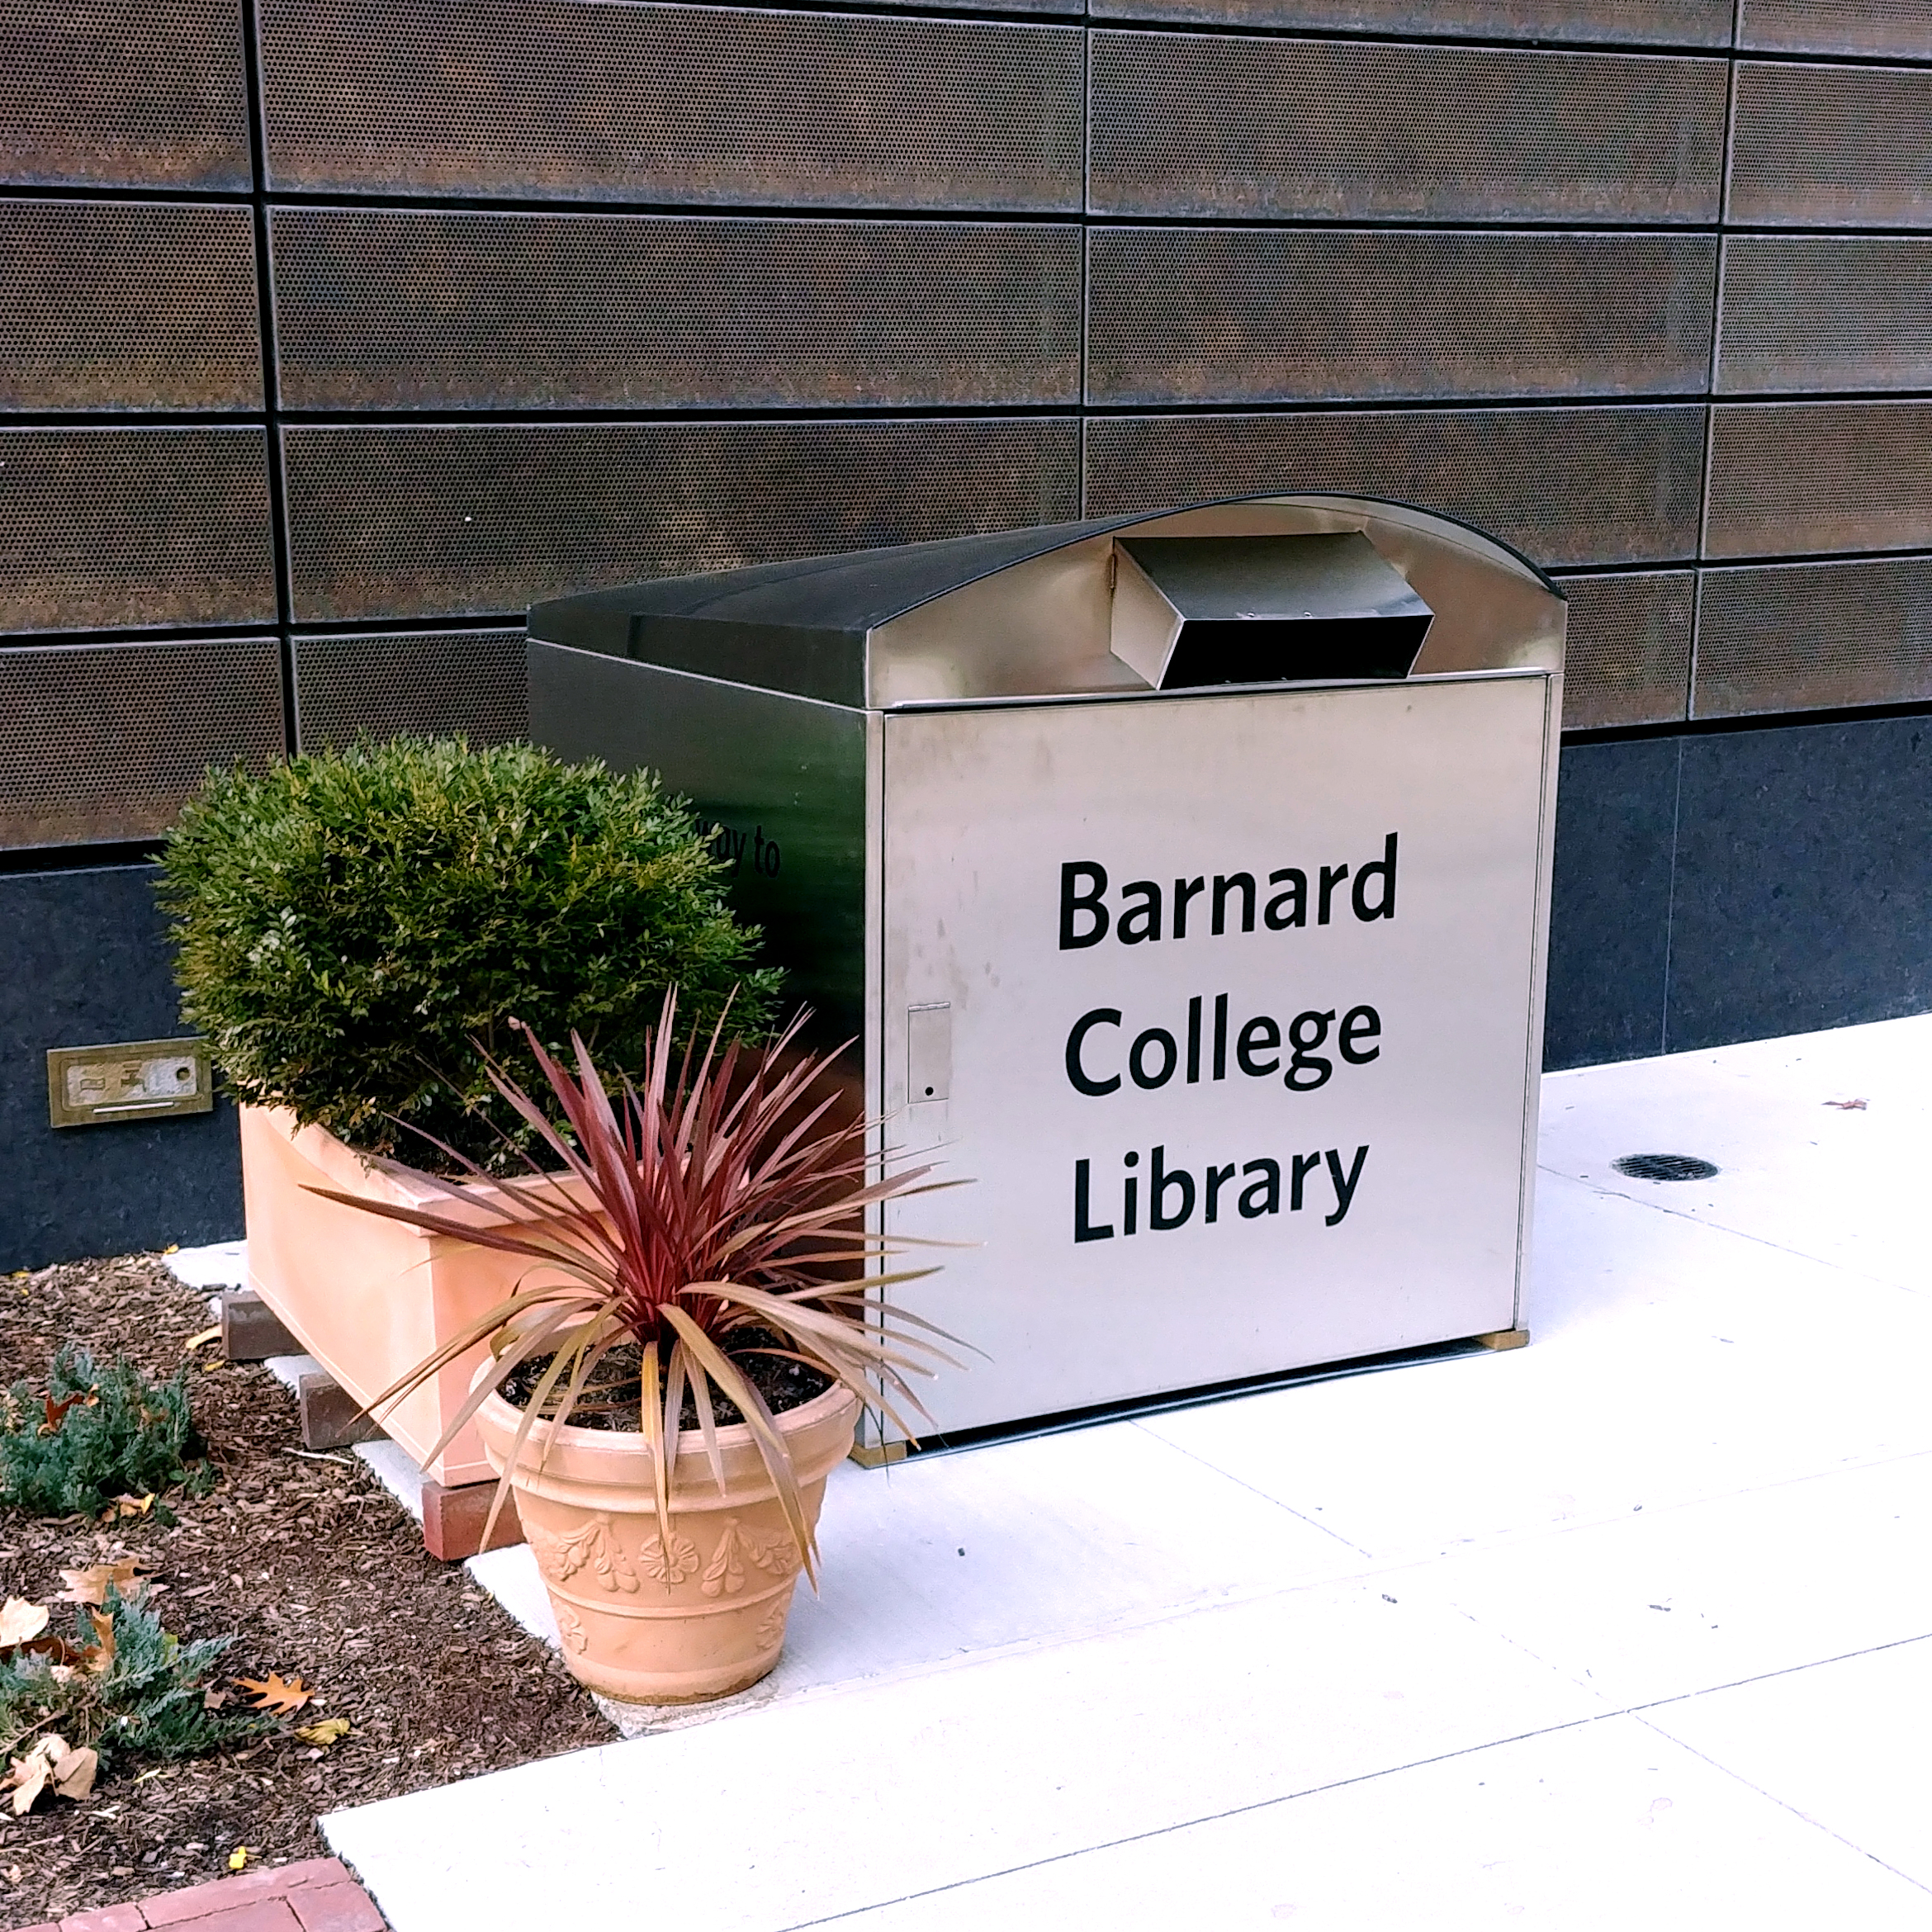 The book drop is silver and has "Barnard College Library" written on its front. 